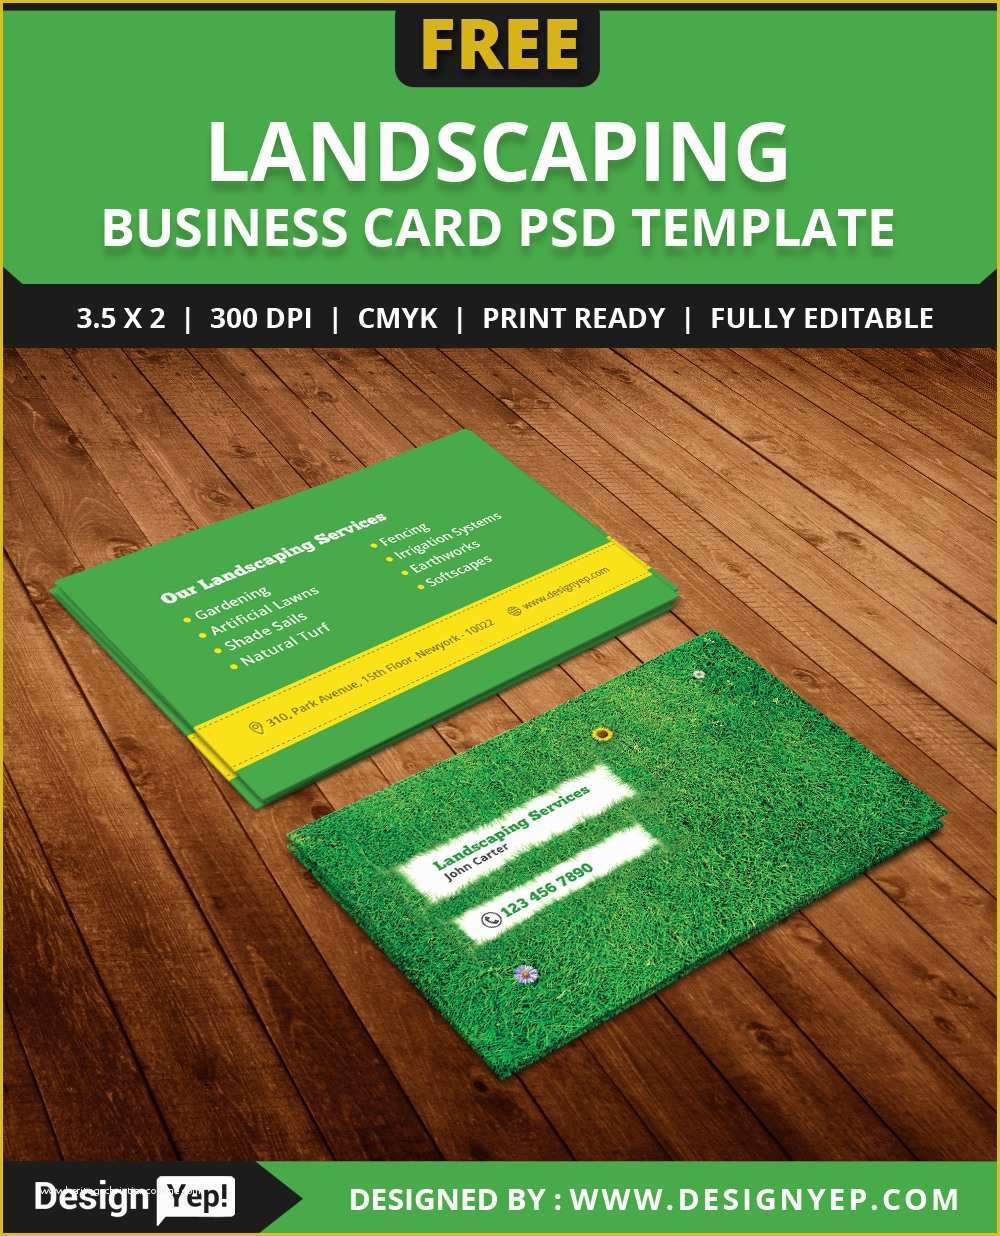 Lawn Care Business Card Templates Free Of Free Landscaping Business Card Template Psd On Behance